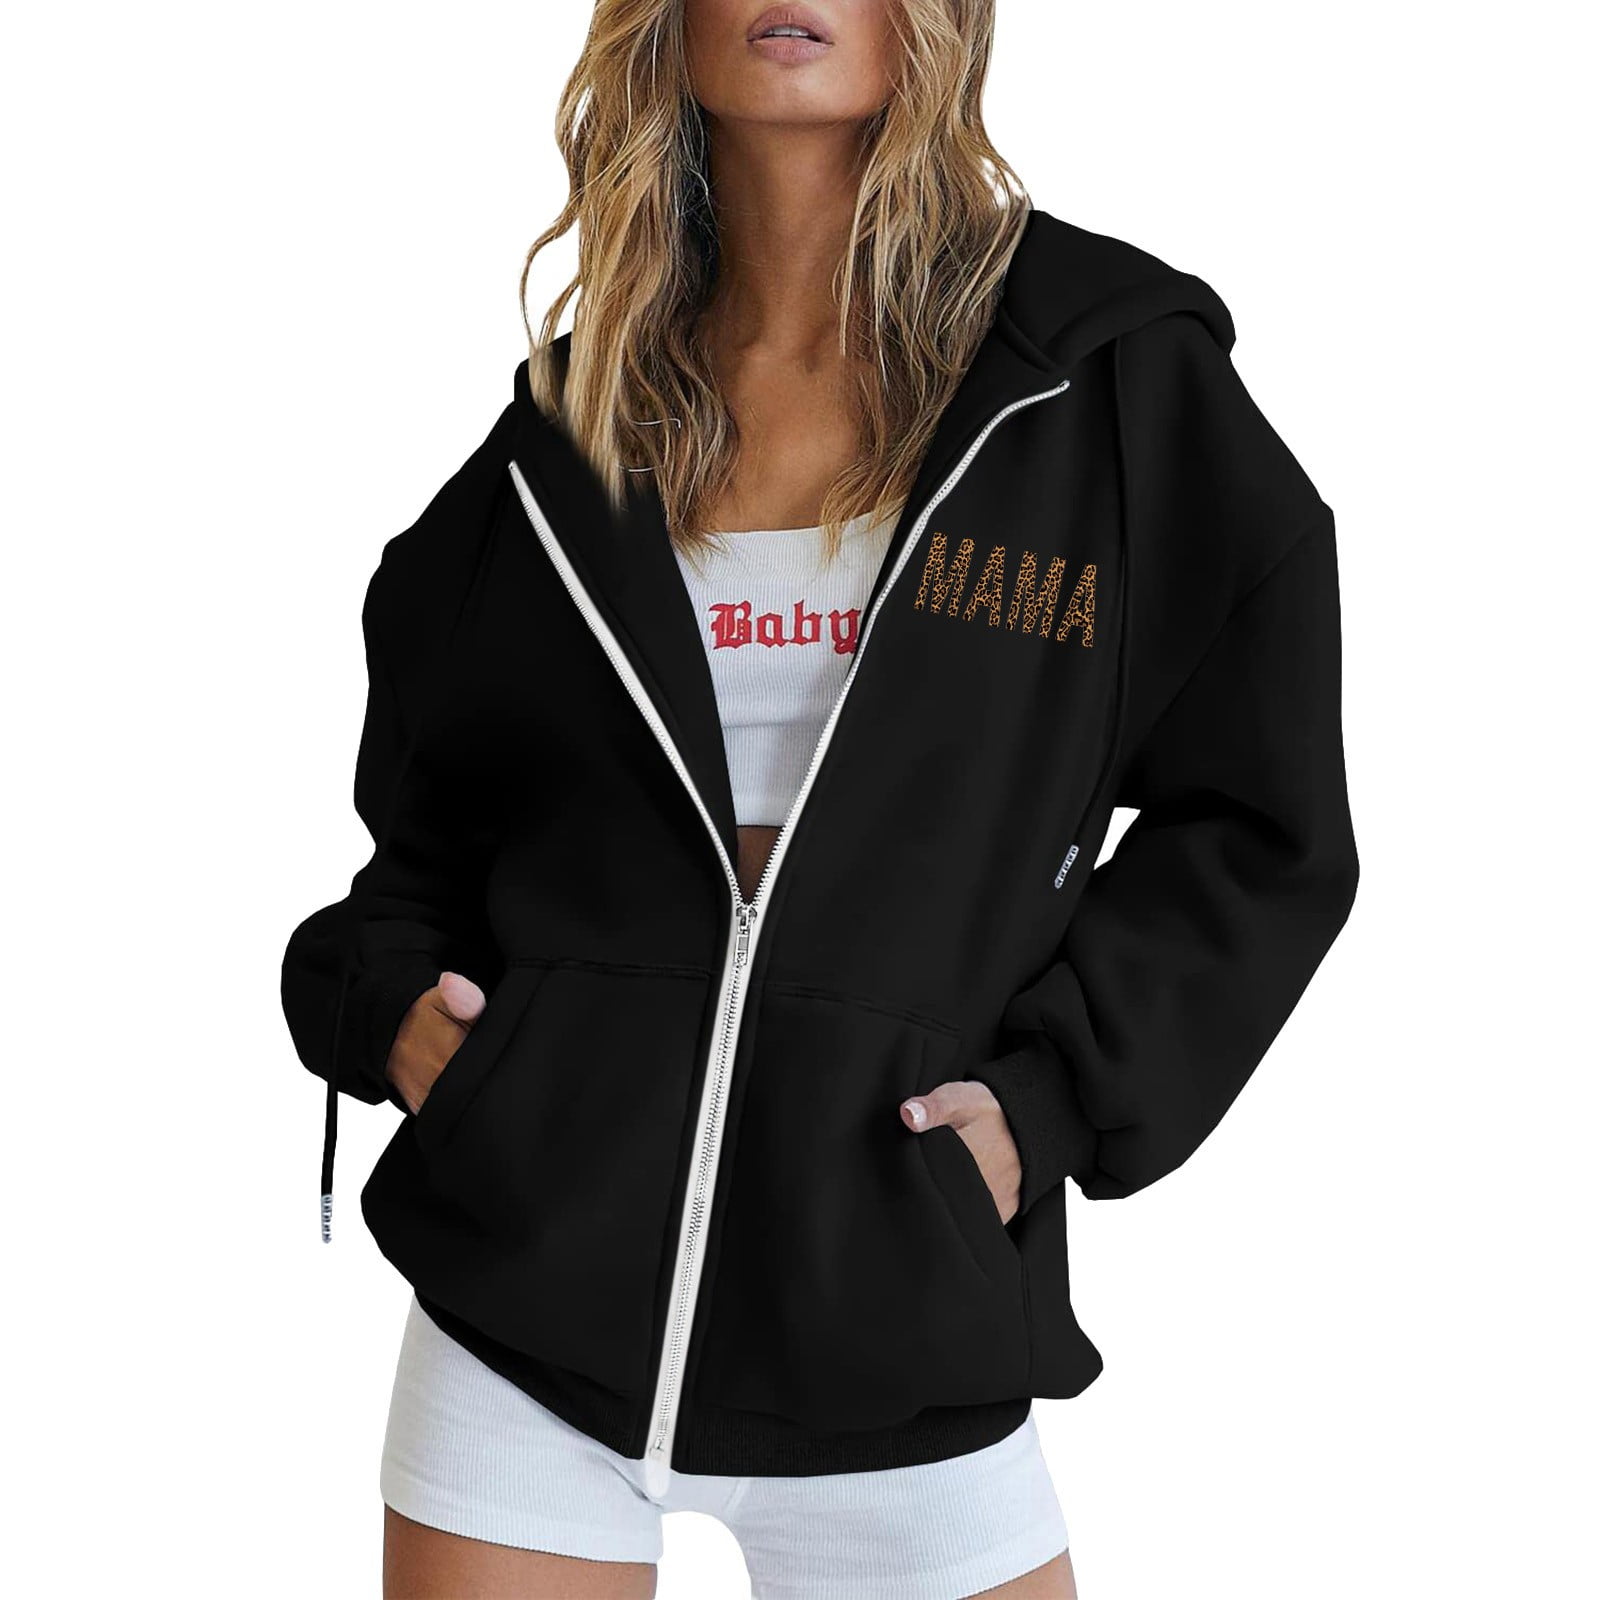 VREWARE trendy hoodies for women,1 dollar items only,chrismas pajamas for  family,womens plus size coats 5x,track my orders for delivery,winter wool  coat,womens bubble jacket at  Women's Coats Shop